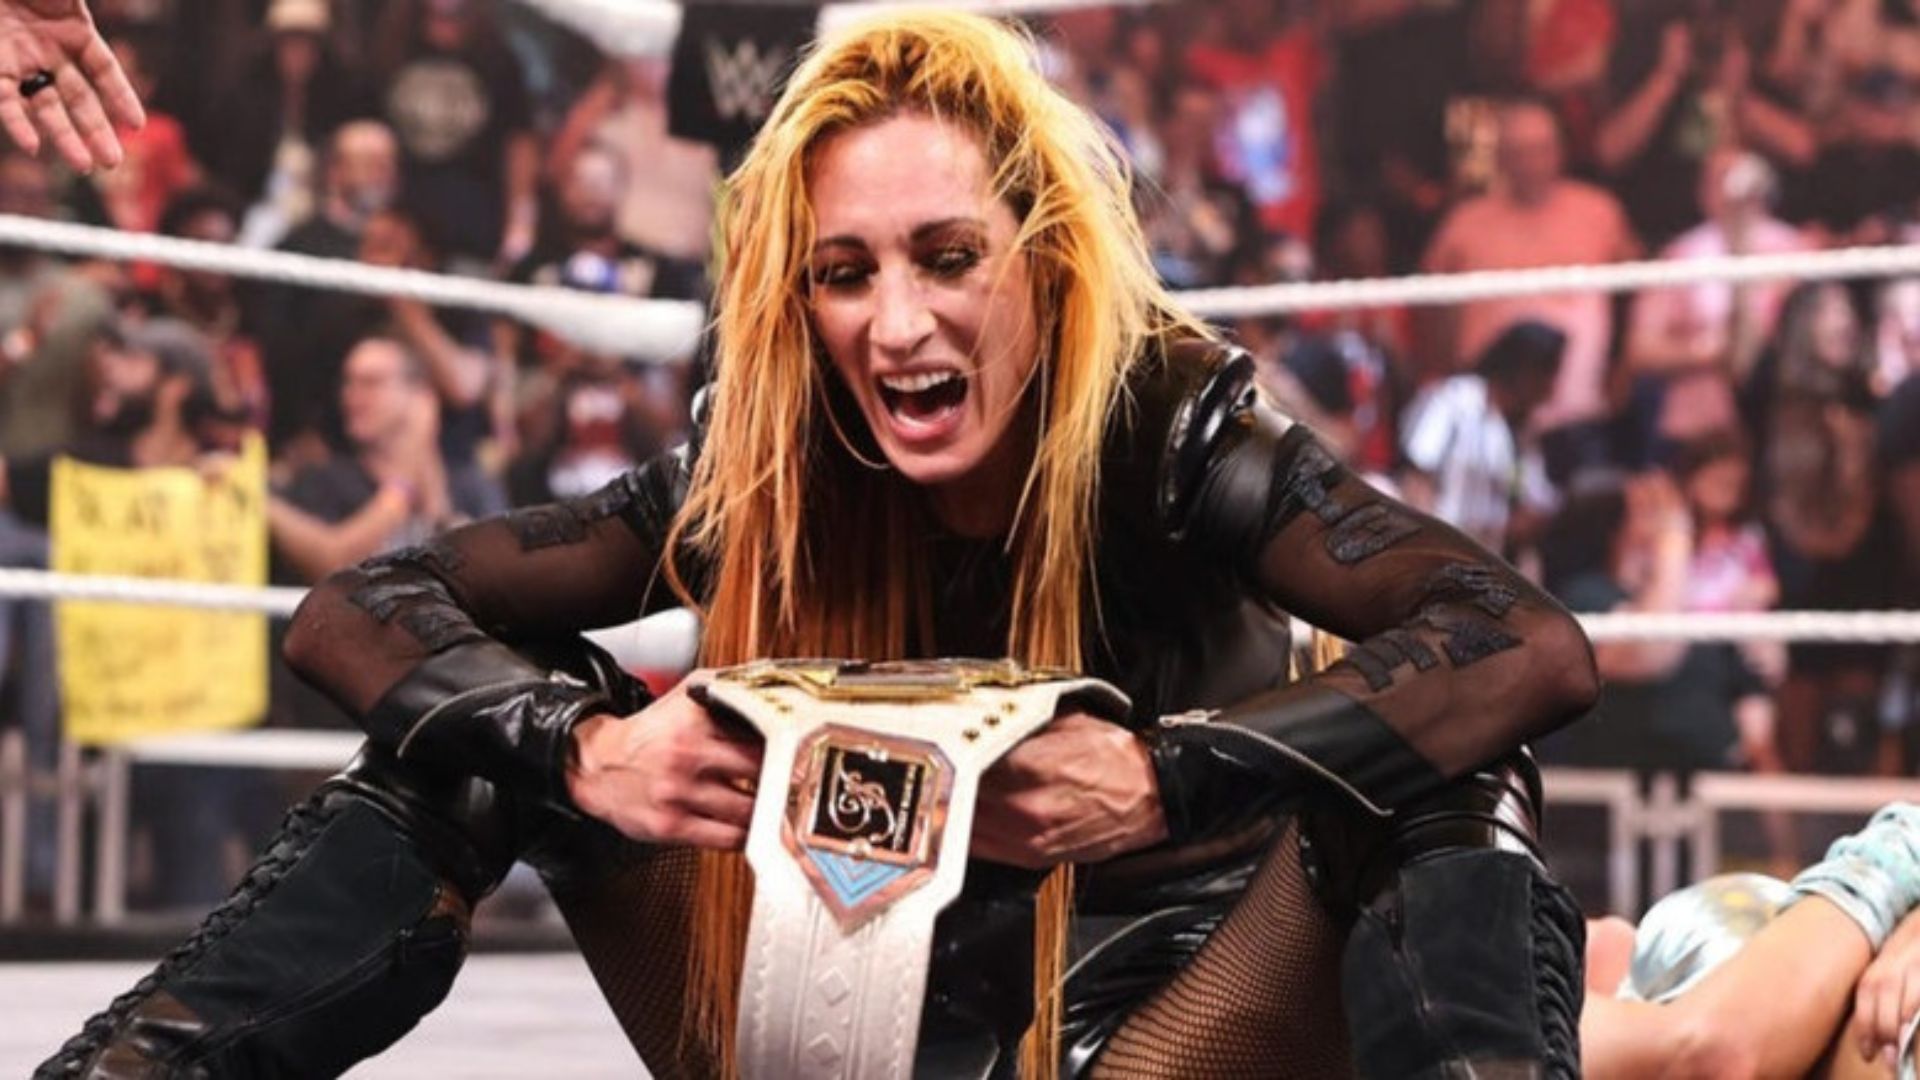 Becky Lynch is the reigning NXT Women